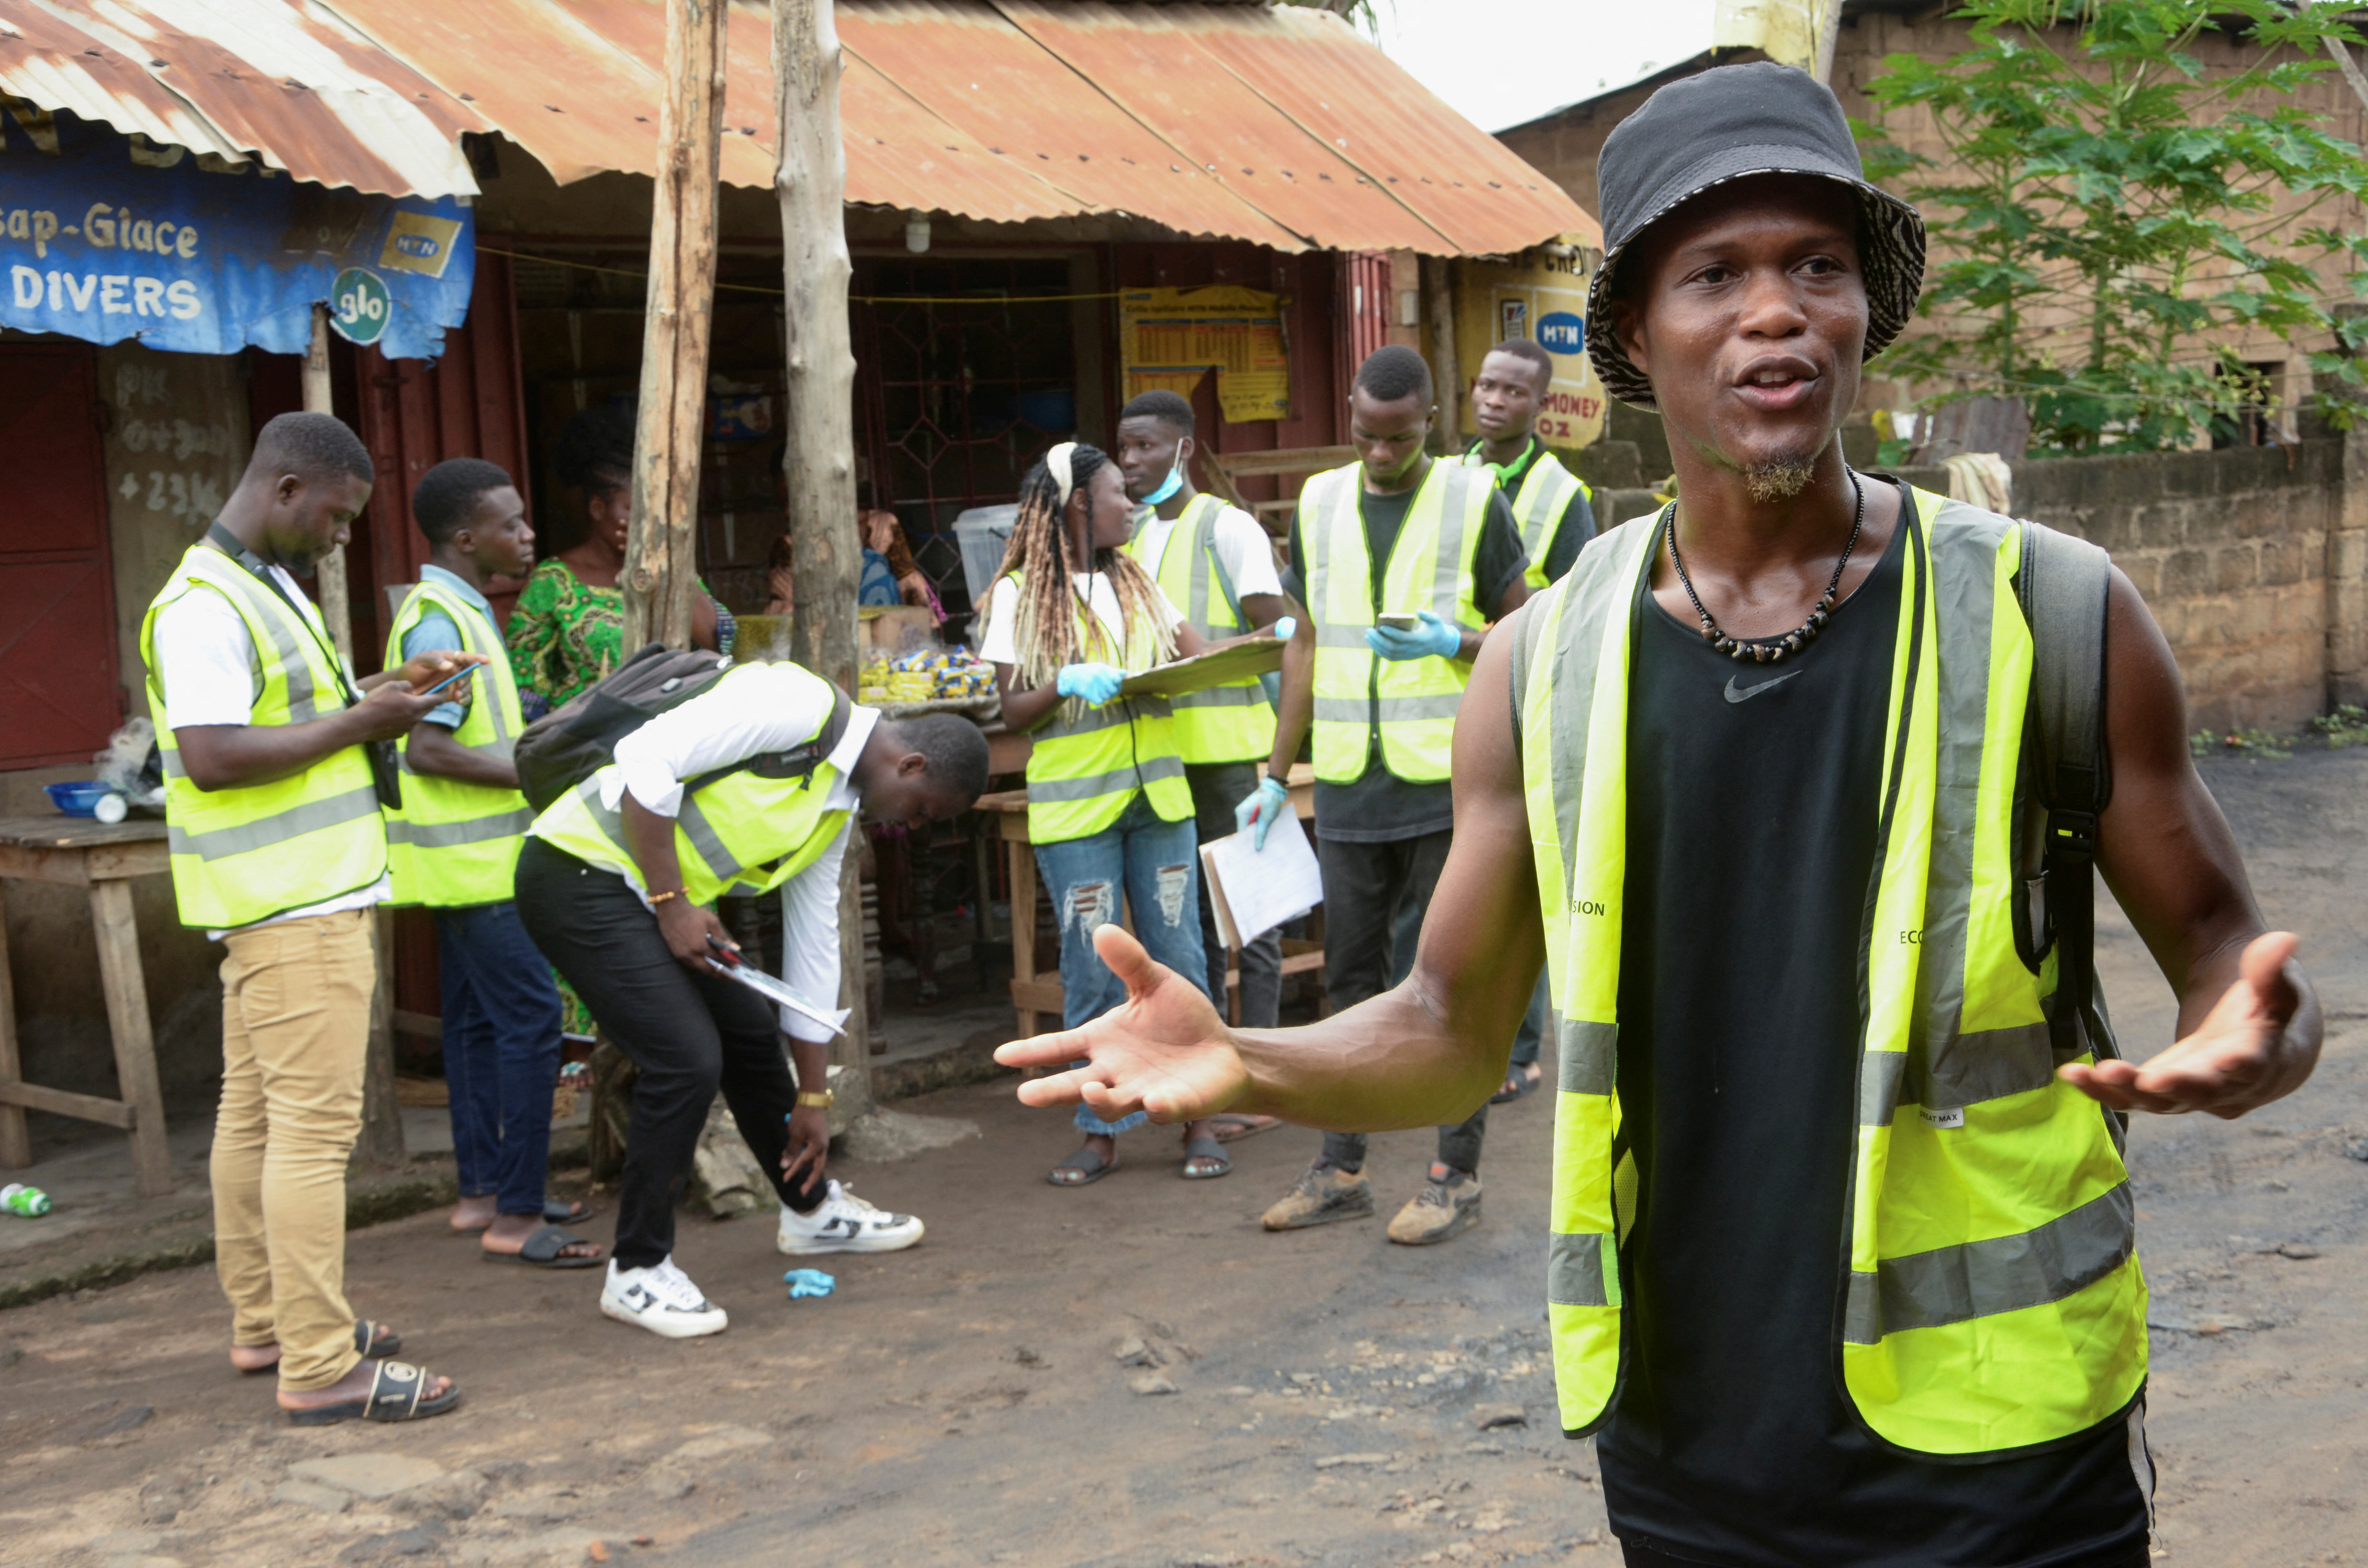 Benin's self-styled 'garbage collector' aims to raise awareness about plastic waste